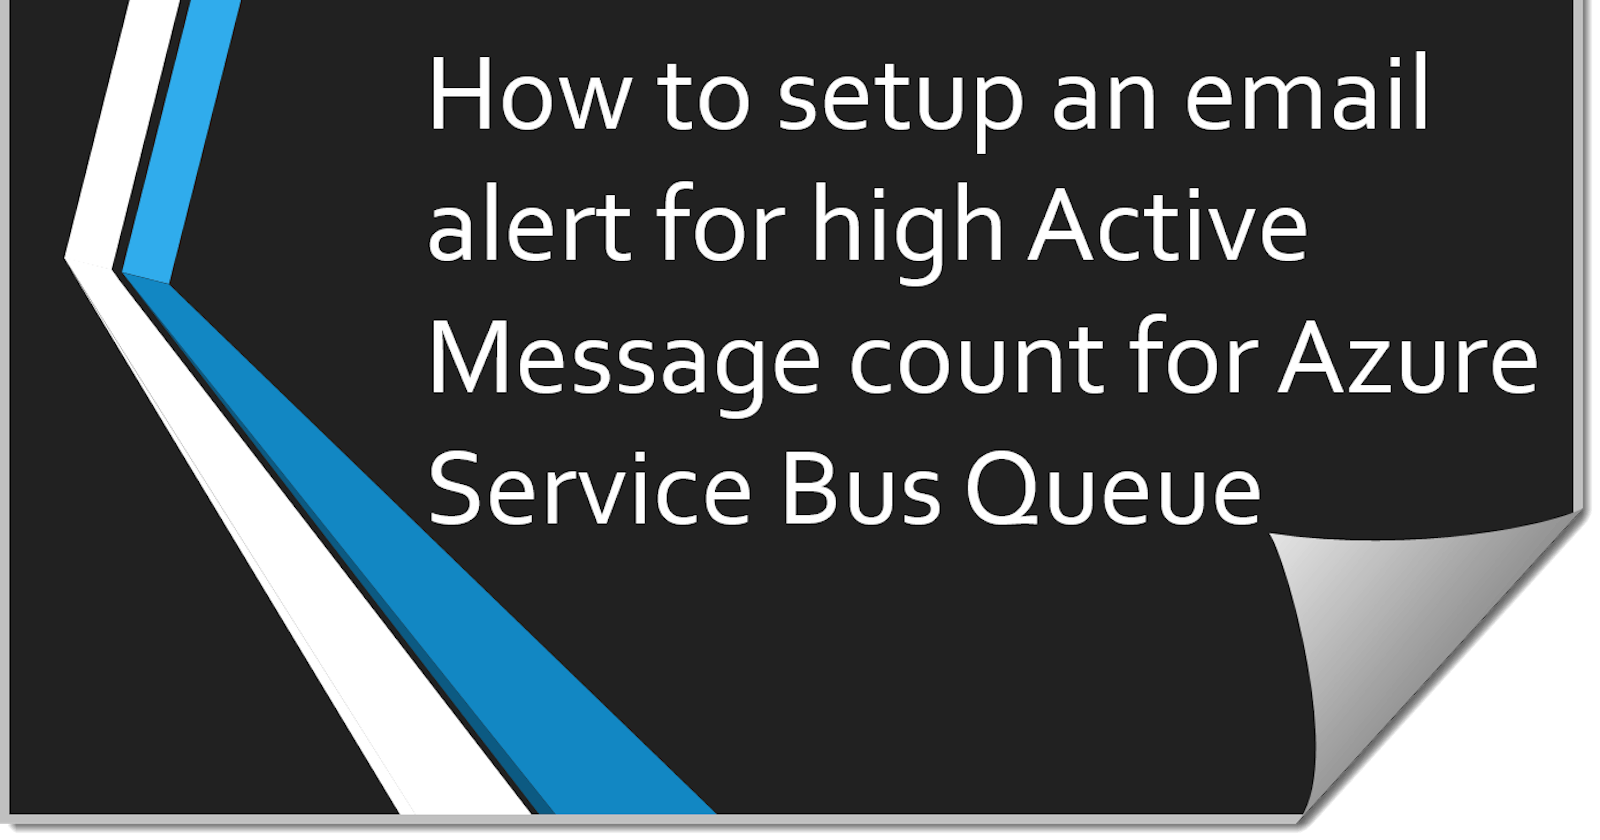 How to setup an email alert for high Active Message count for Azure Service Bus Queue